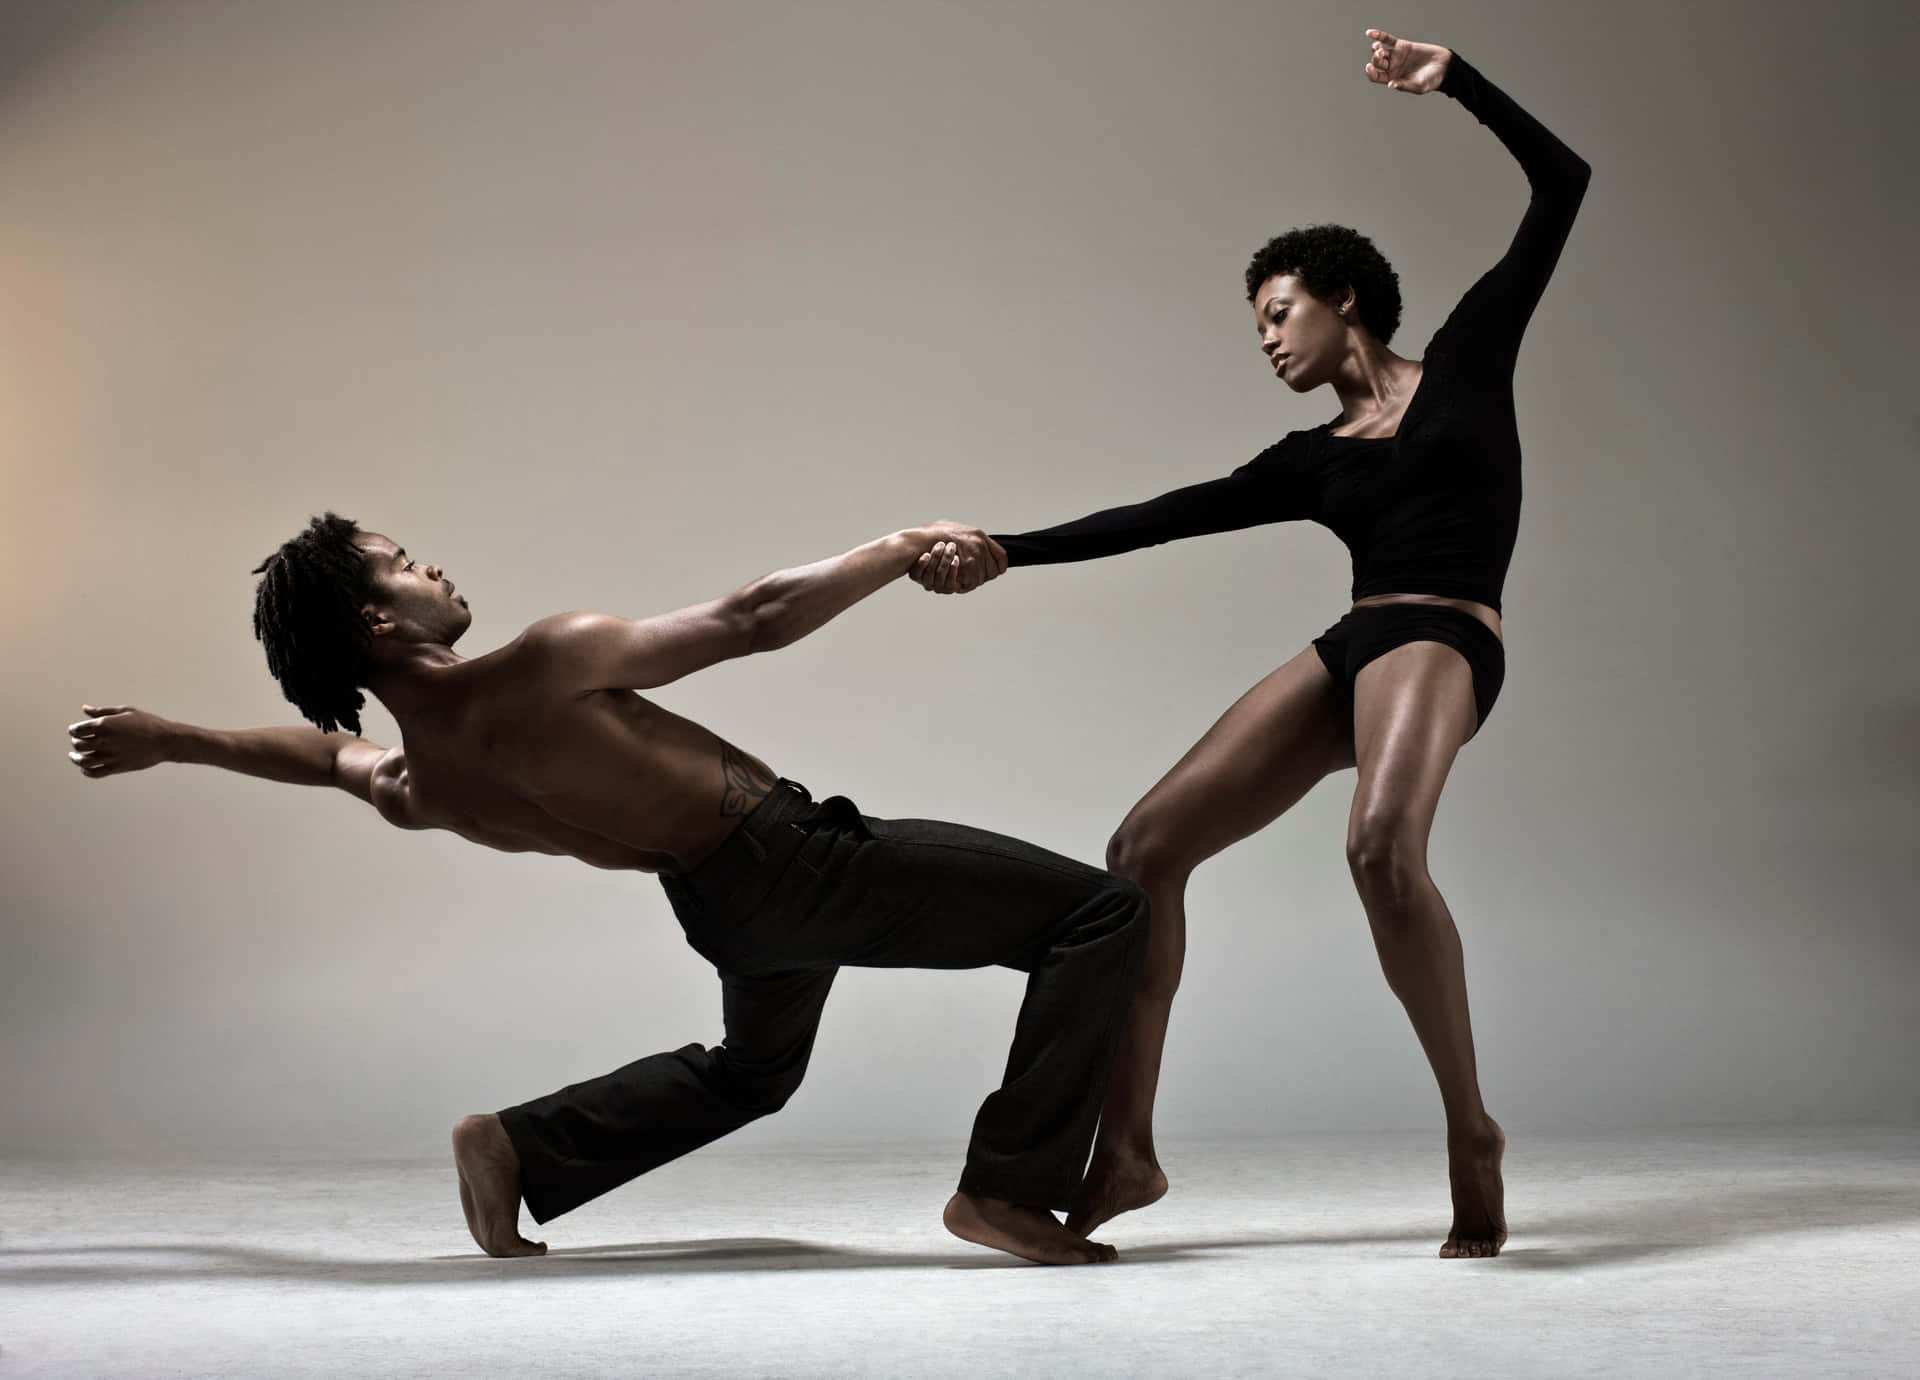 Two Dancers In A Studio Doing A Dance